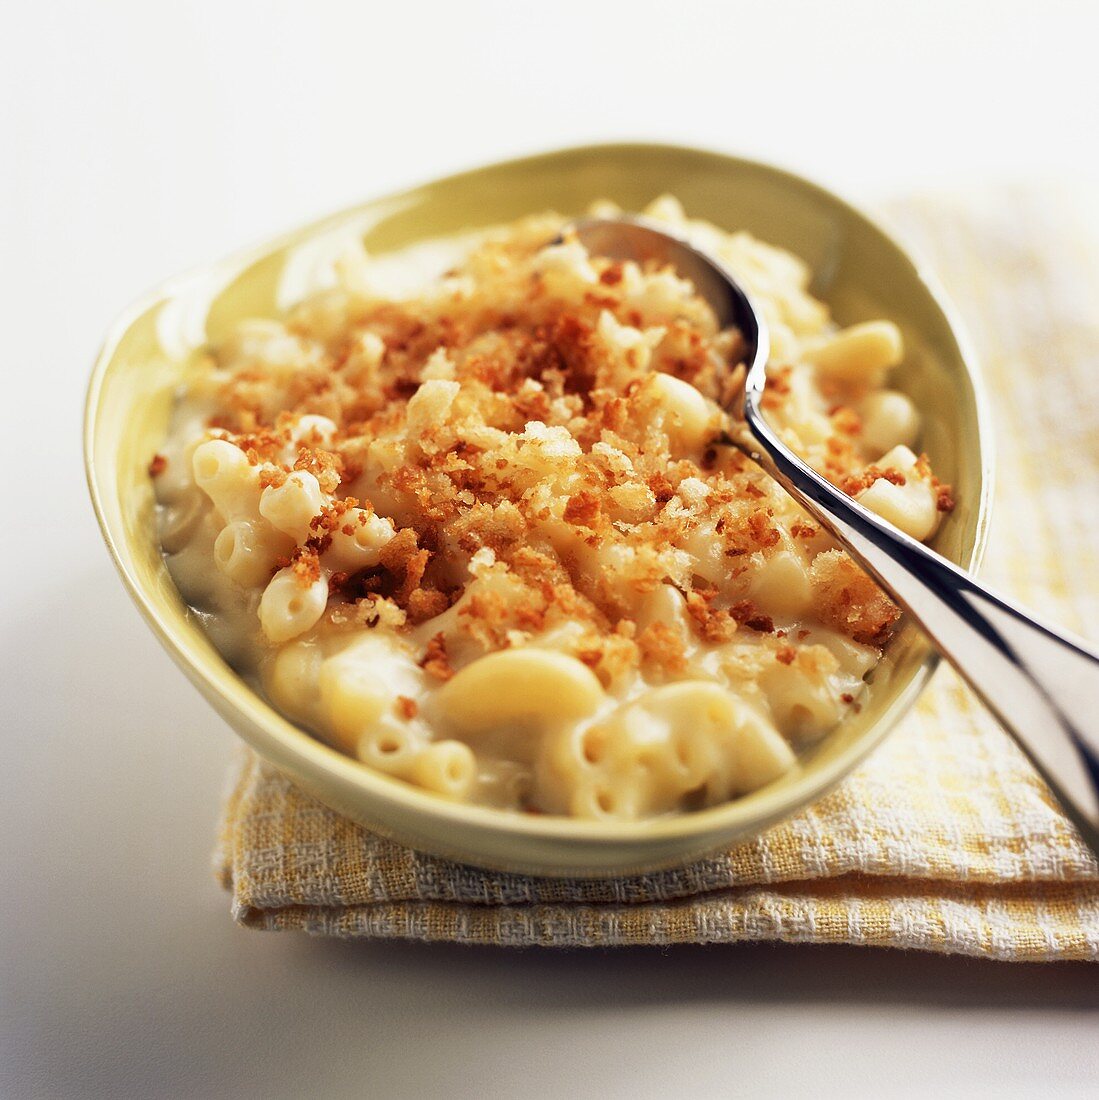 A Bowl of Creamy Macaroni and Cheese with Breadcrumb Topping